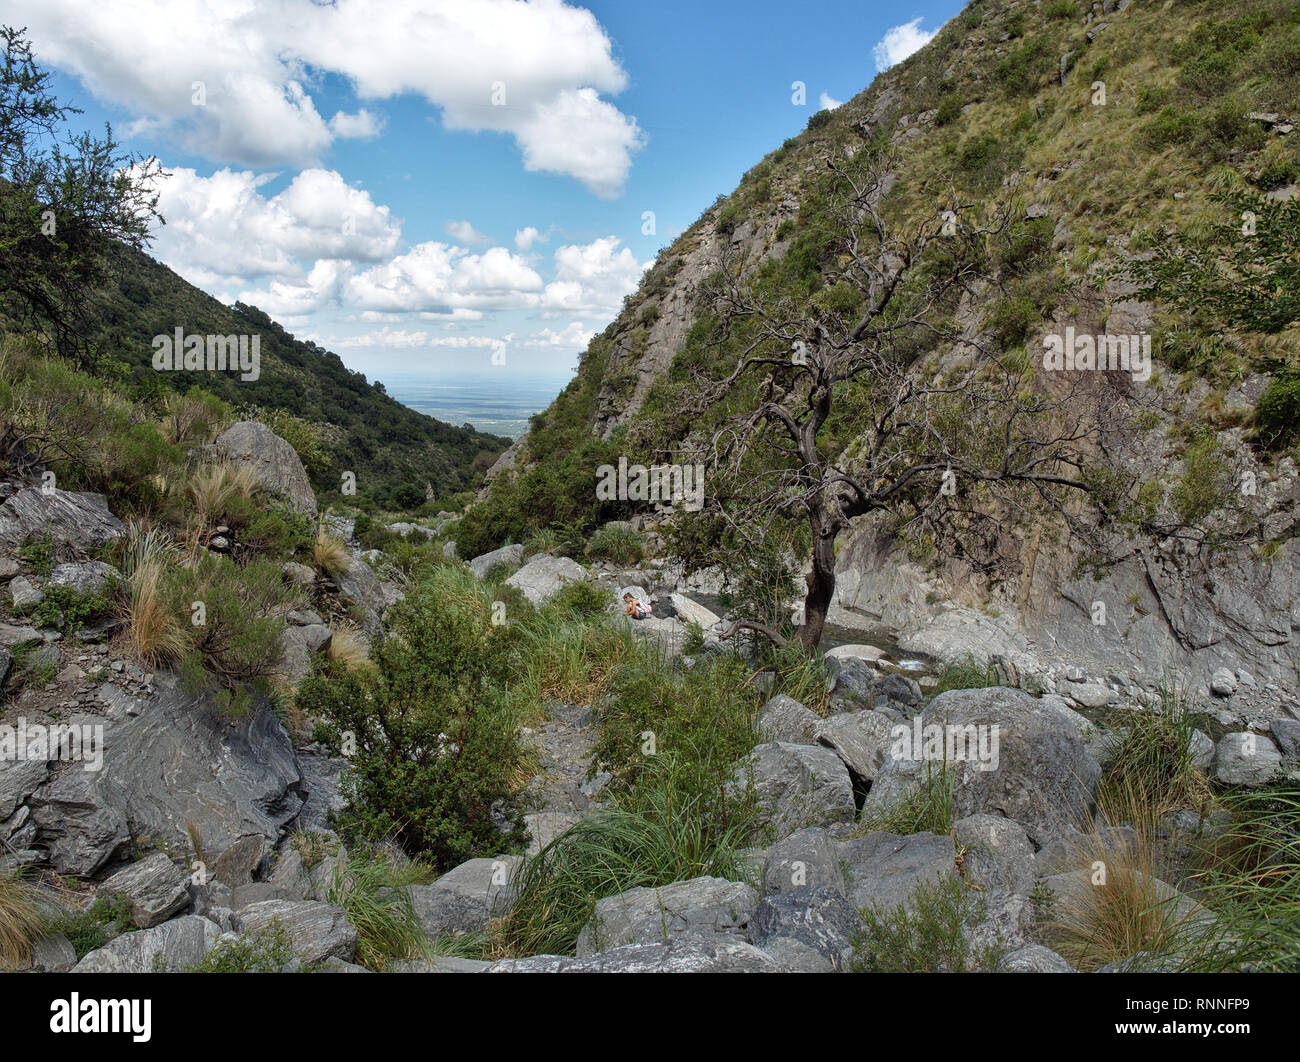 The view at Reserva Florofaunistica reserve in Merlo, San Luis, Argentina. Stock Photo